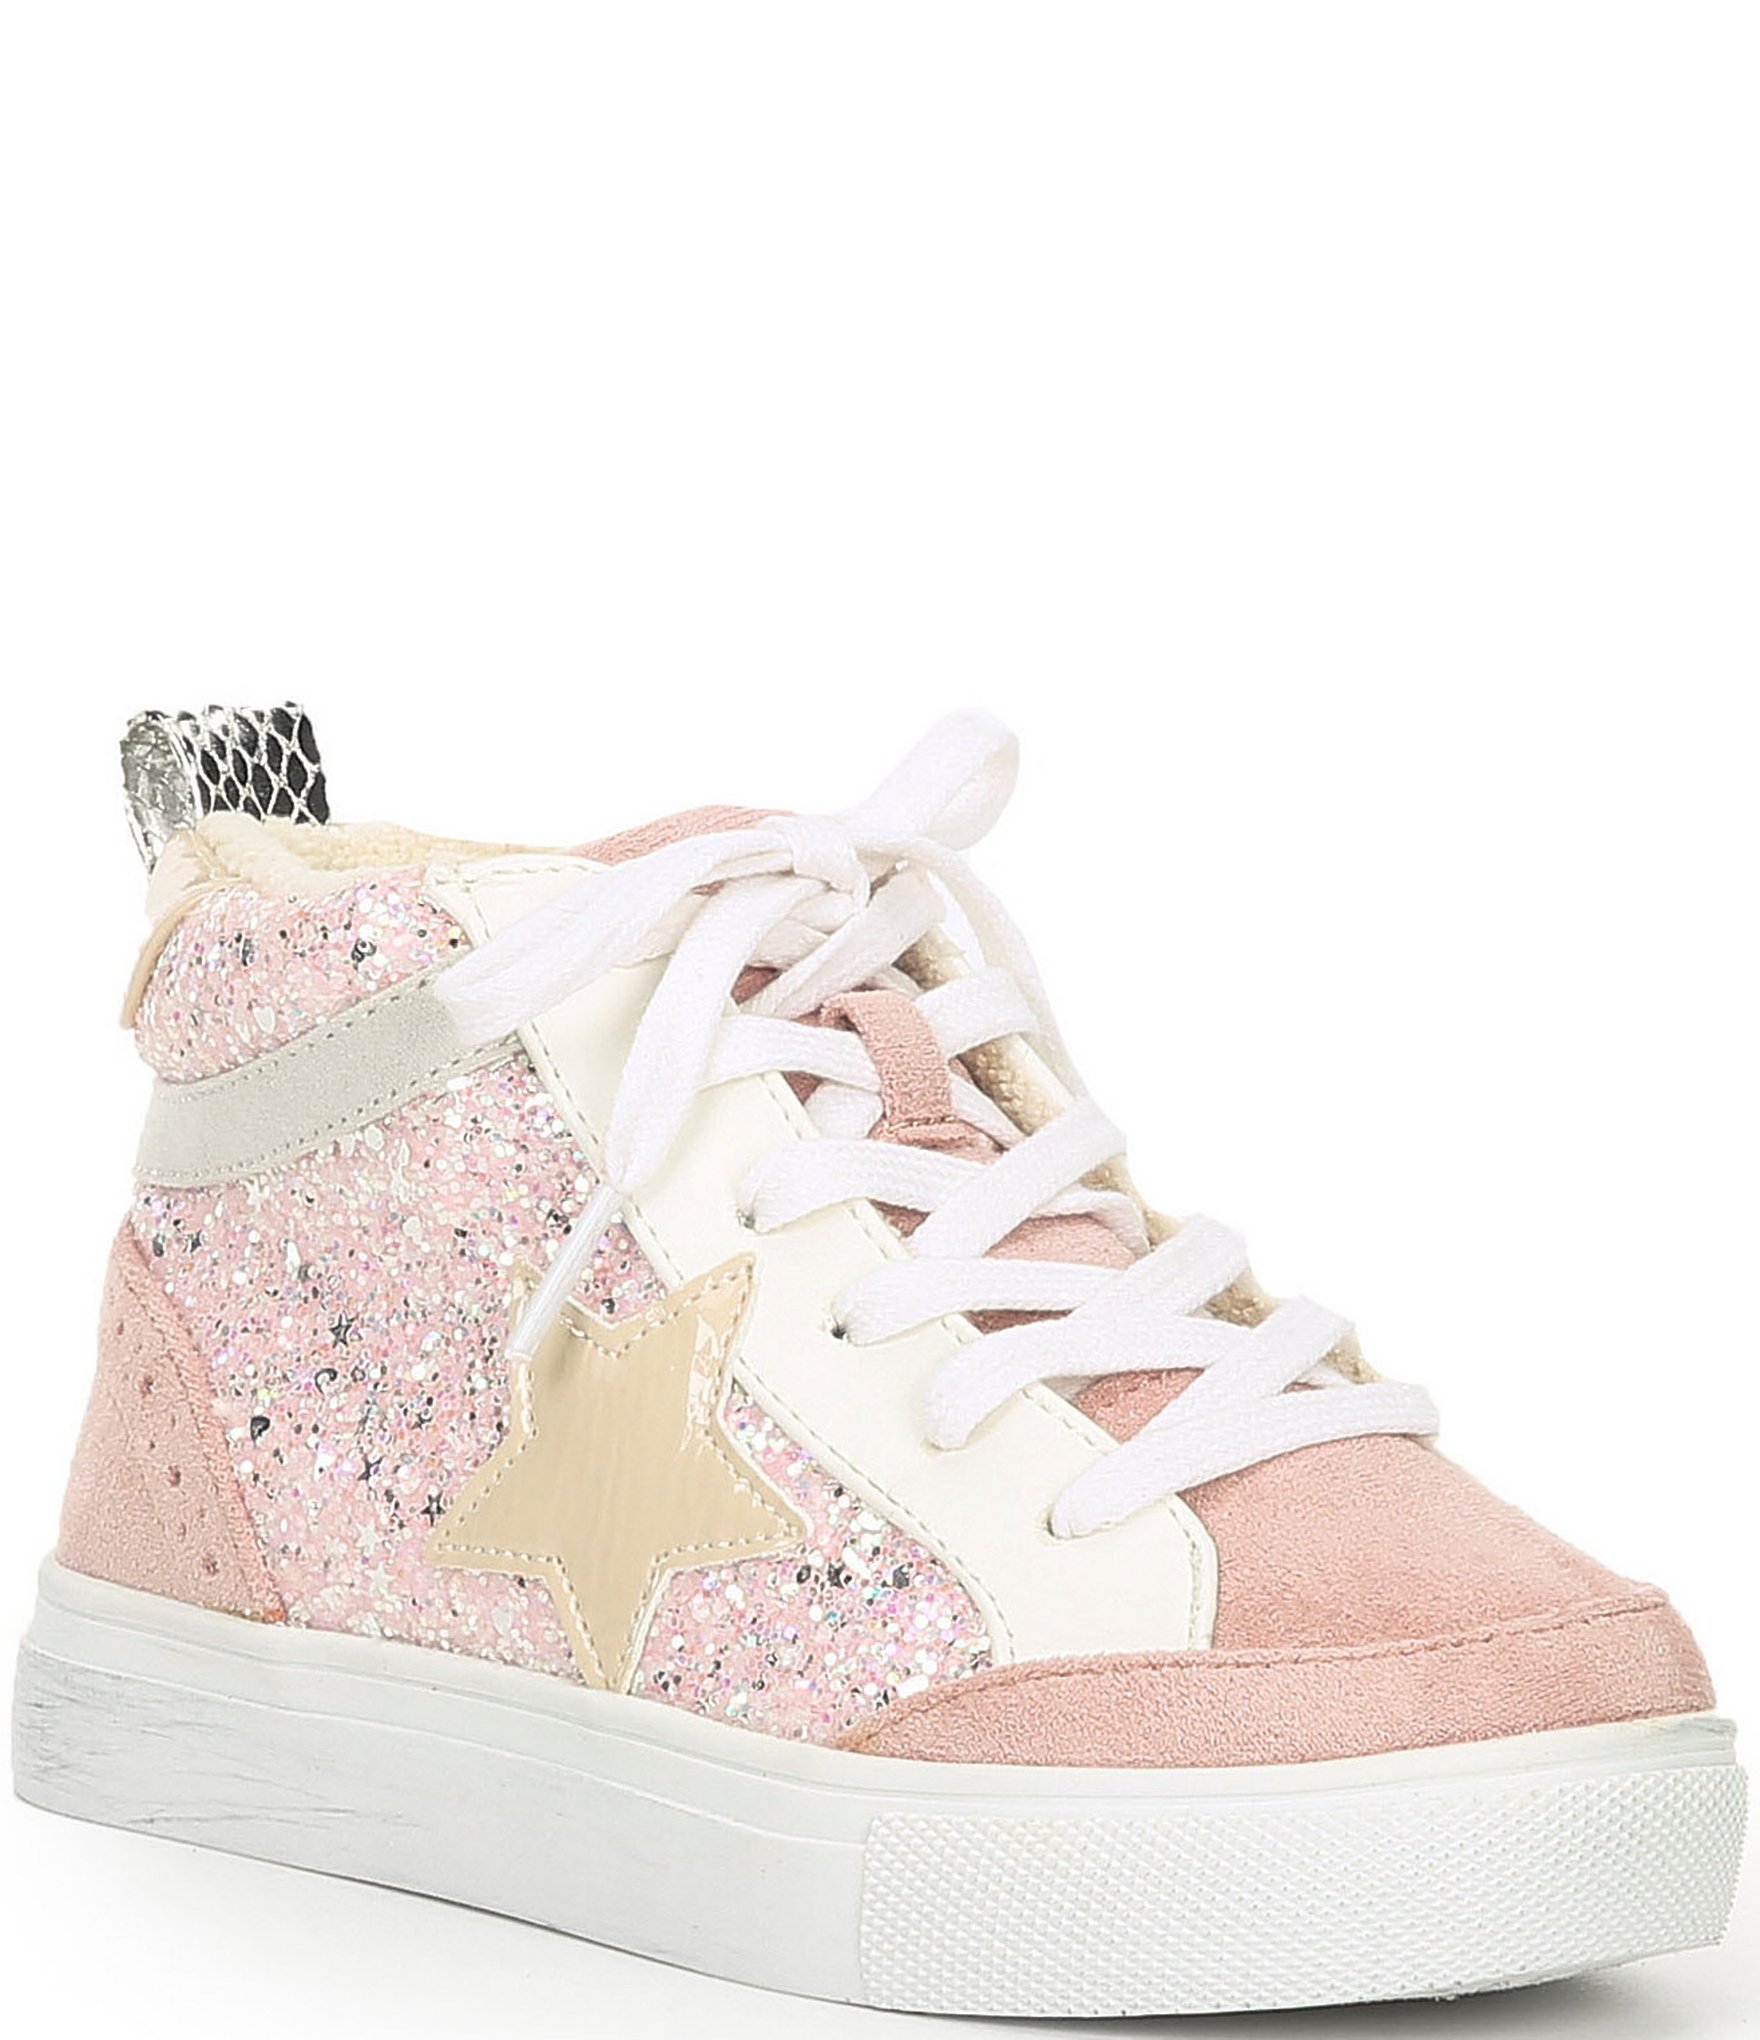 madden girl high top sneakers